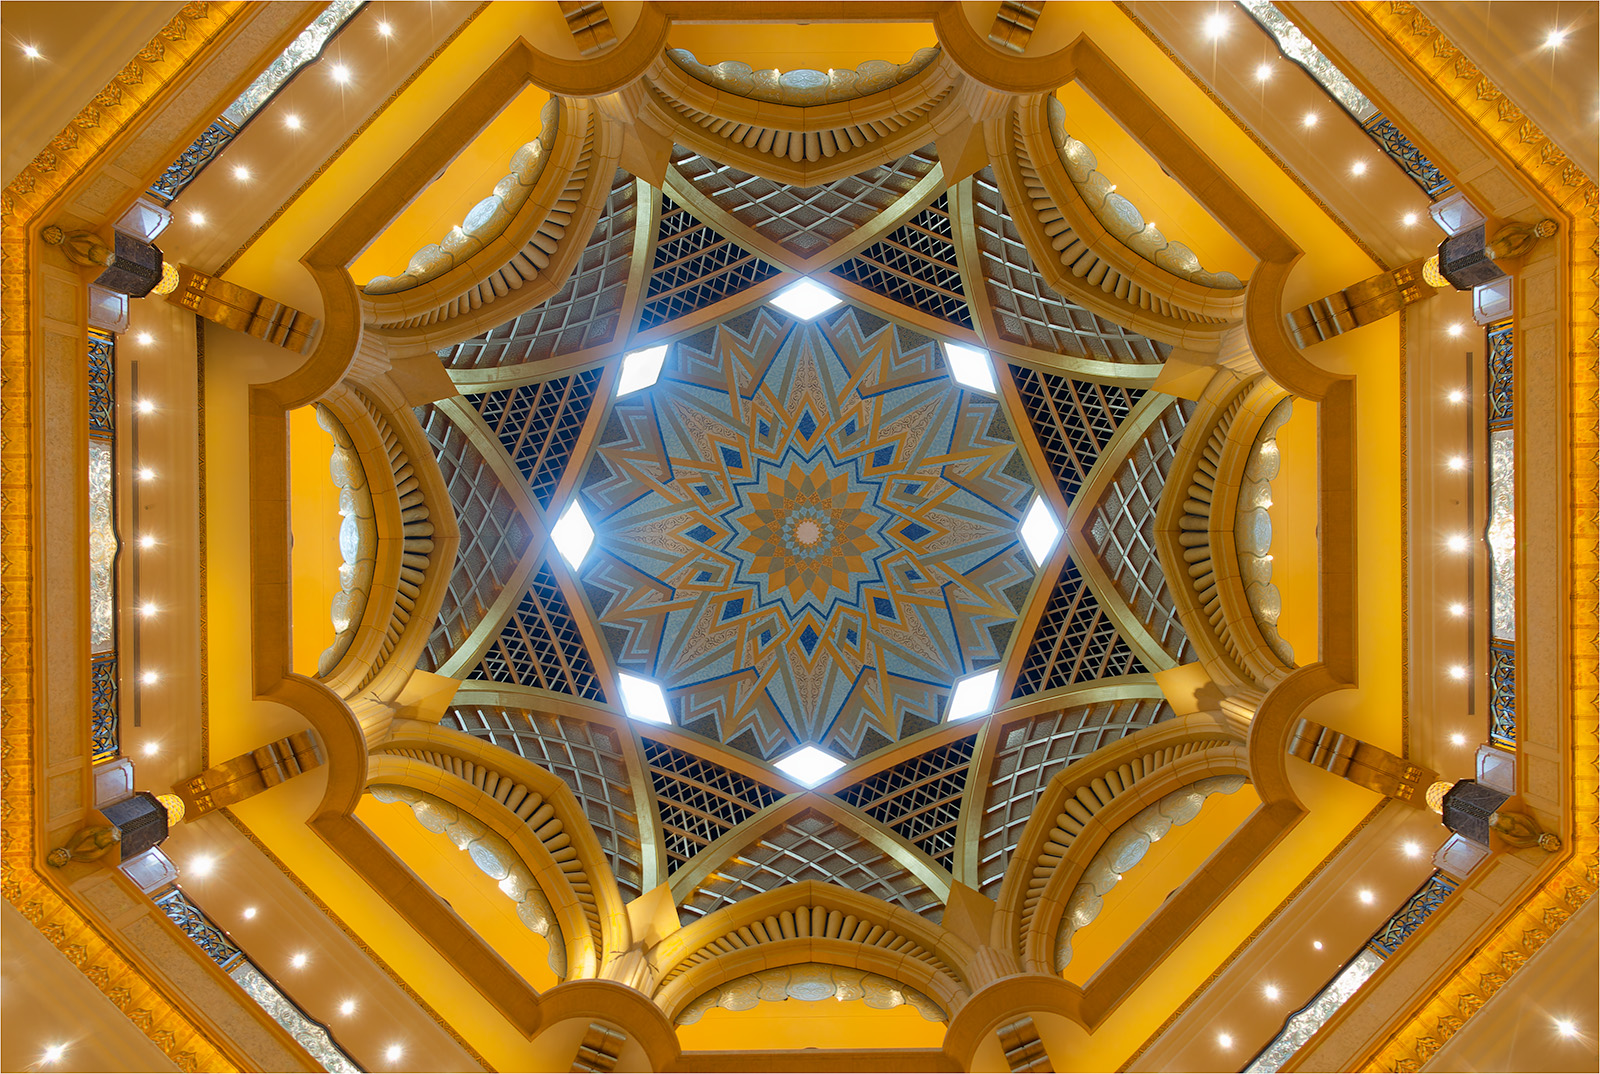 10-Palace-ceiling-patterns-by-Harold-Russell